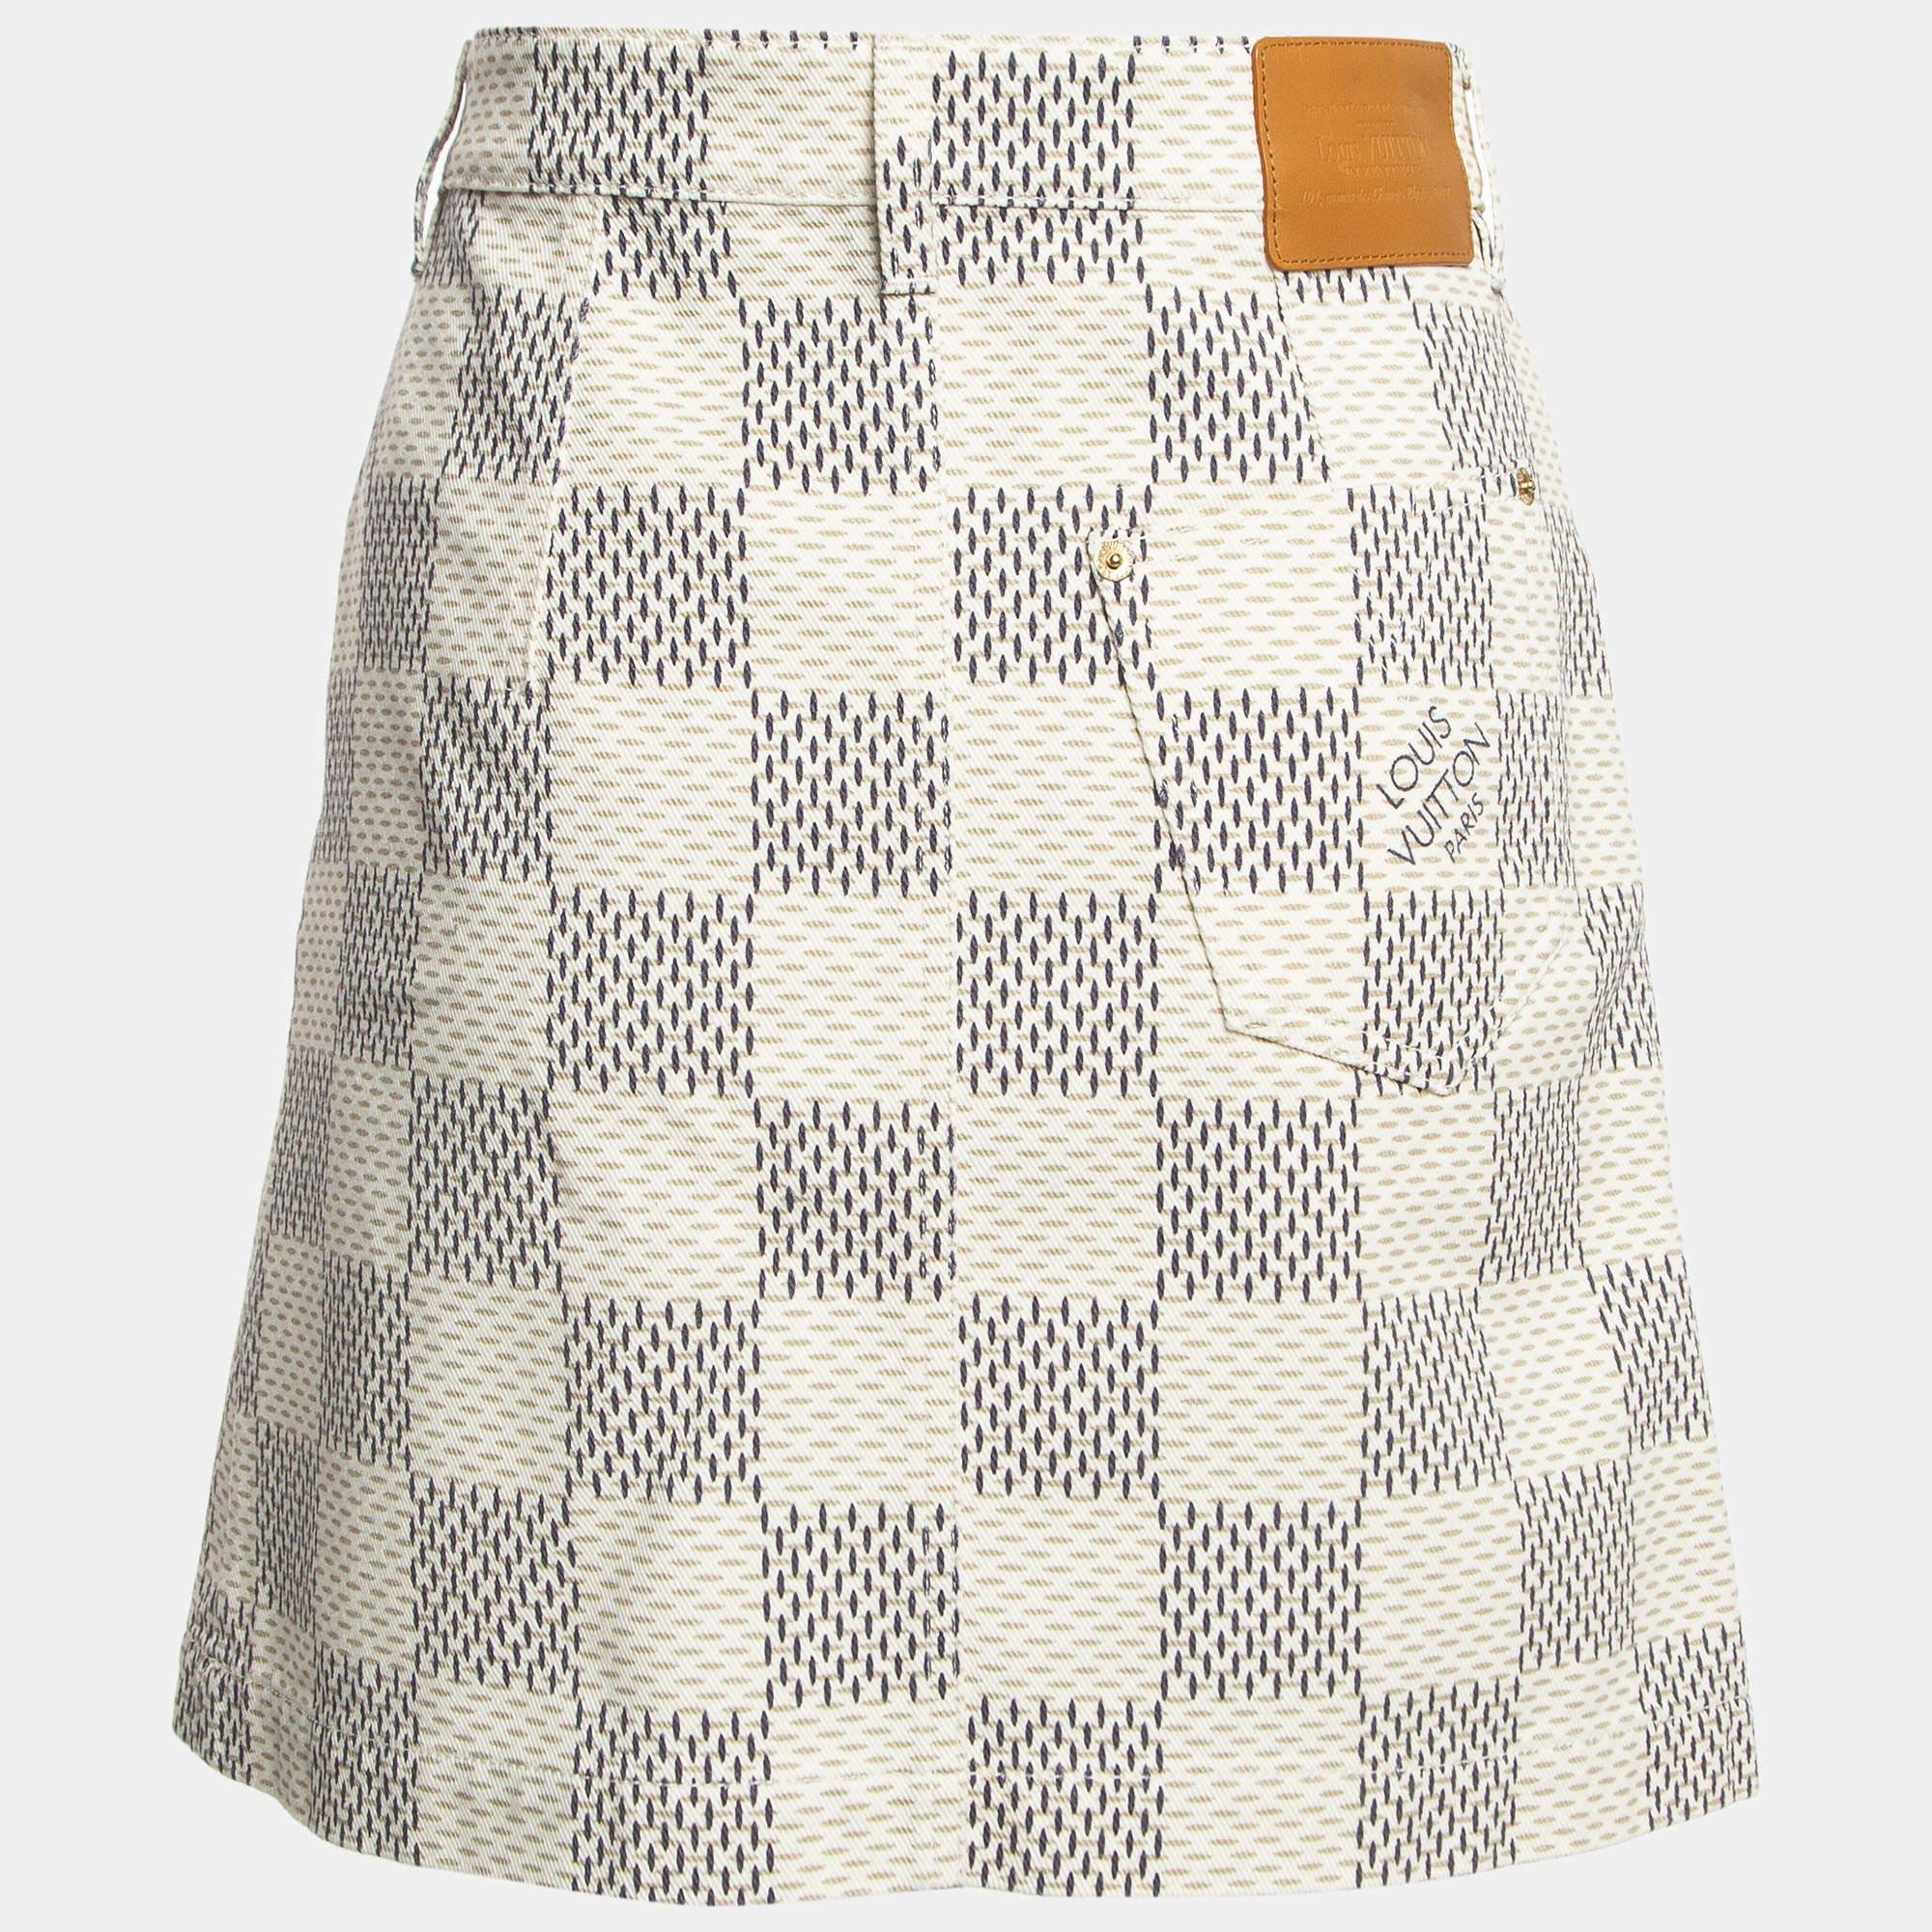 Indulge in the epitome of chic with the Louis Vuitton mini skirt. Crafted with exquisite attention to detail, this skirt features the iconic Damier Azur print on soft denim, exuding timeless elegance and effortless style for any occasion.

